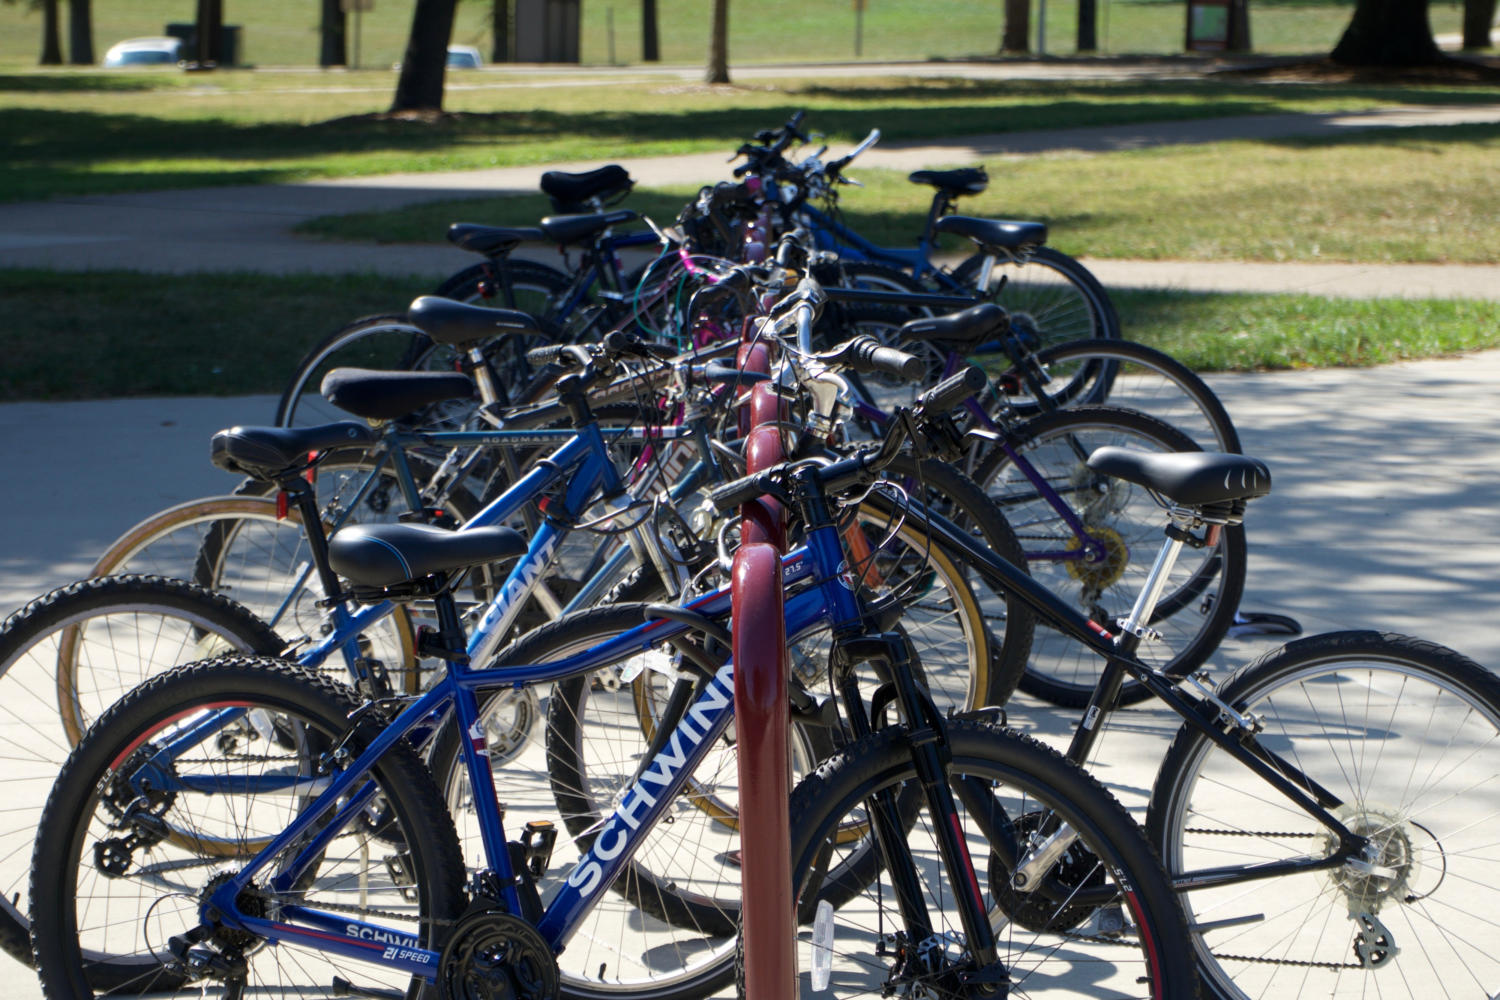 Students+bicycles+at+the+beginning+of+a+new+bike+trail+Saturday%2C+Sept.+9%2C+2017%2C+between+the+SIU+Recreation+Center+to+the+tower+apartments+on+Grand+Ave.+%28Auston+Mahan+%7C+%40AustonMahanDE%29